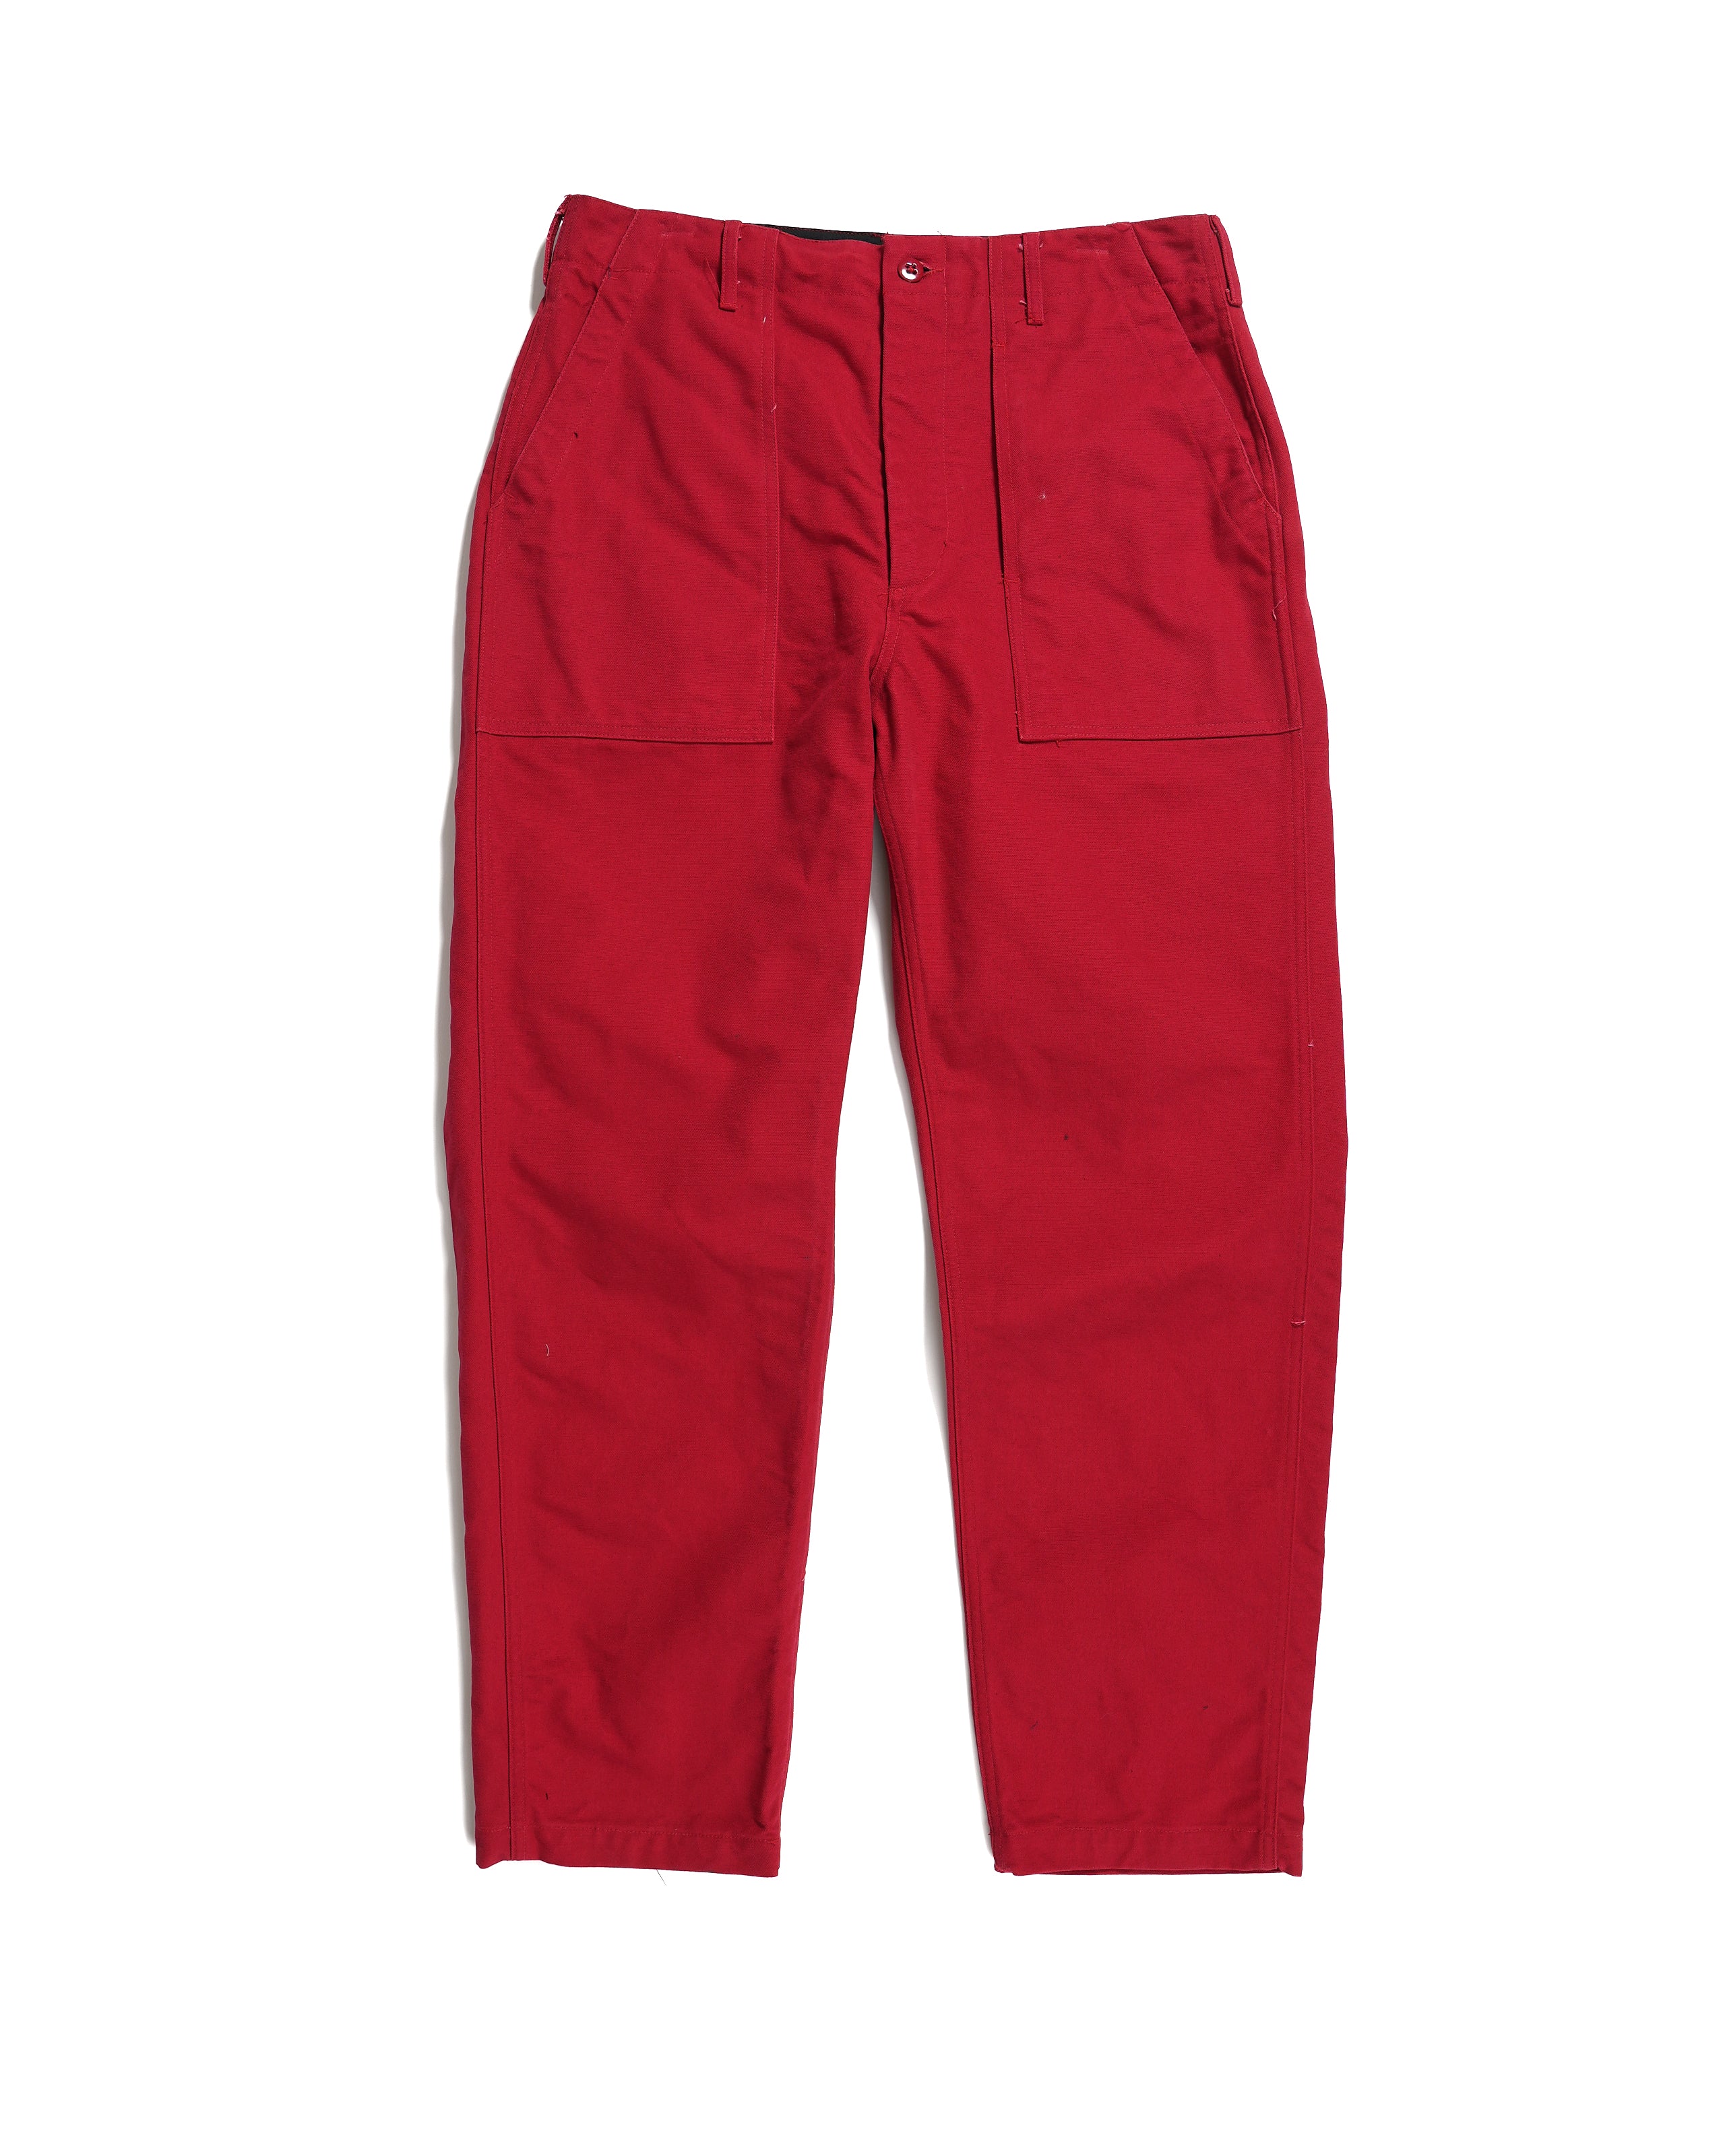 Fatigue Pant - Red 12oz Duck Canvas